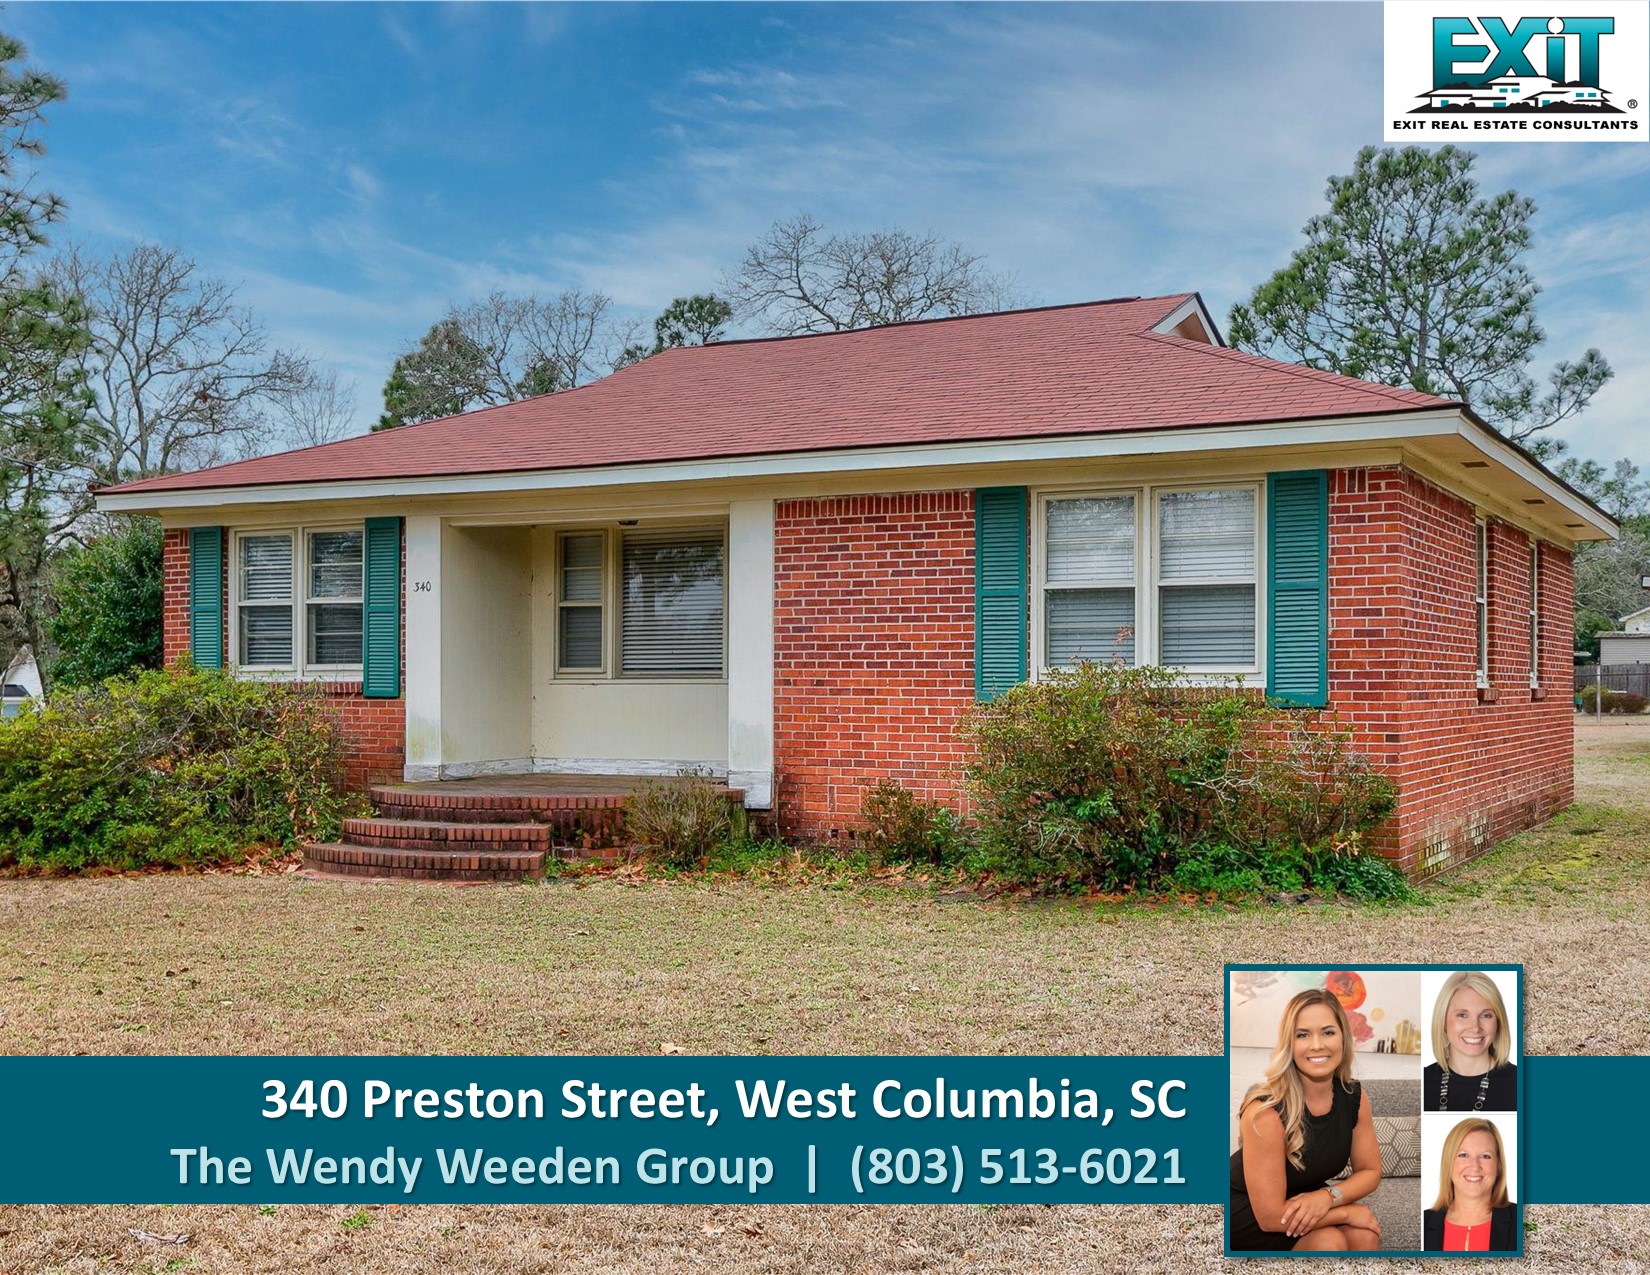 Just listed in West Columbia